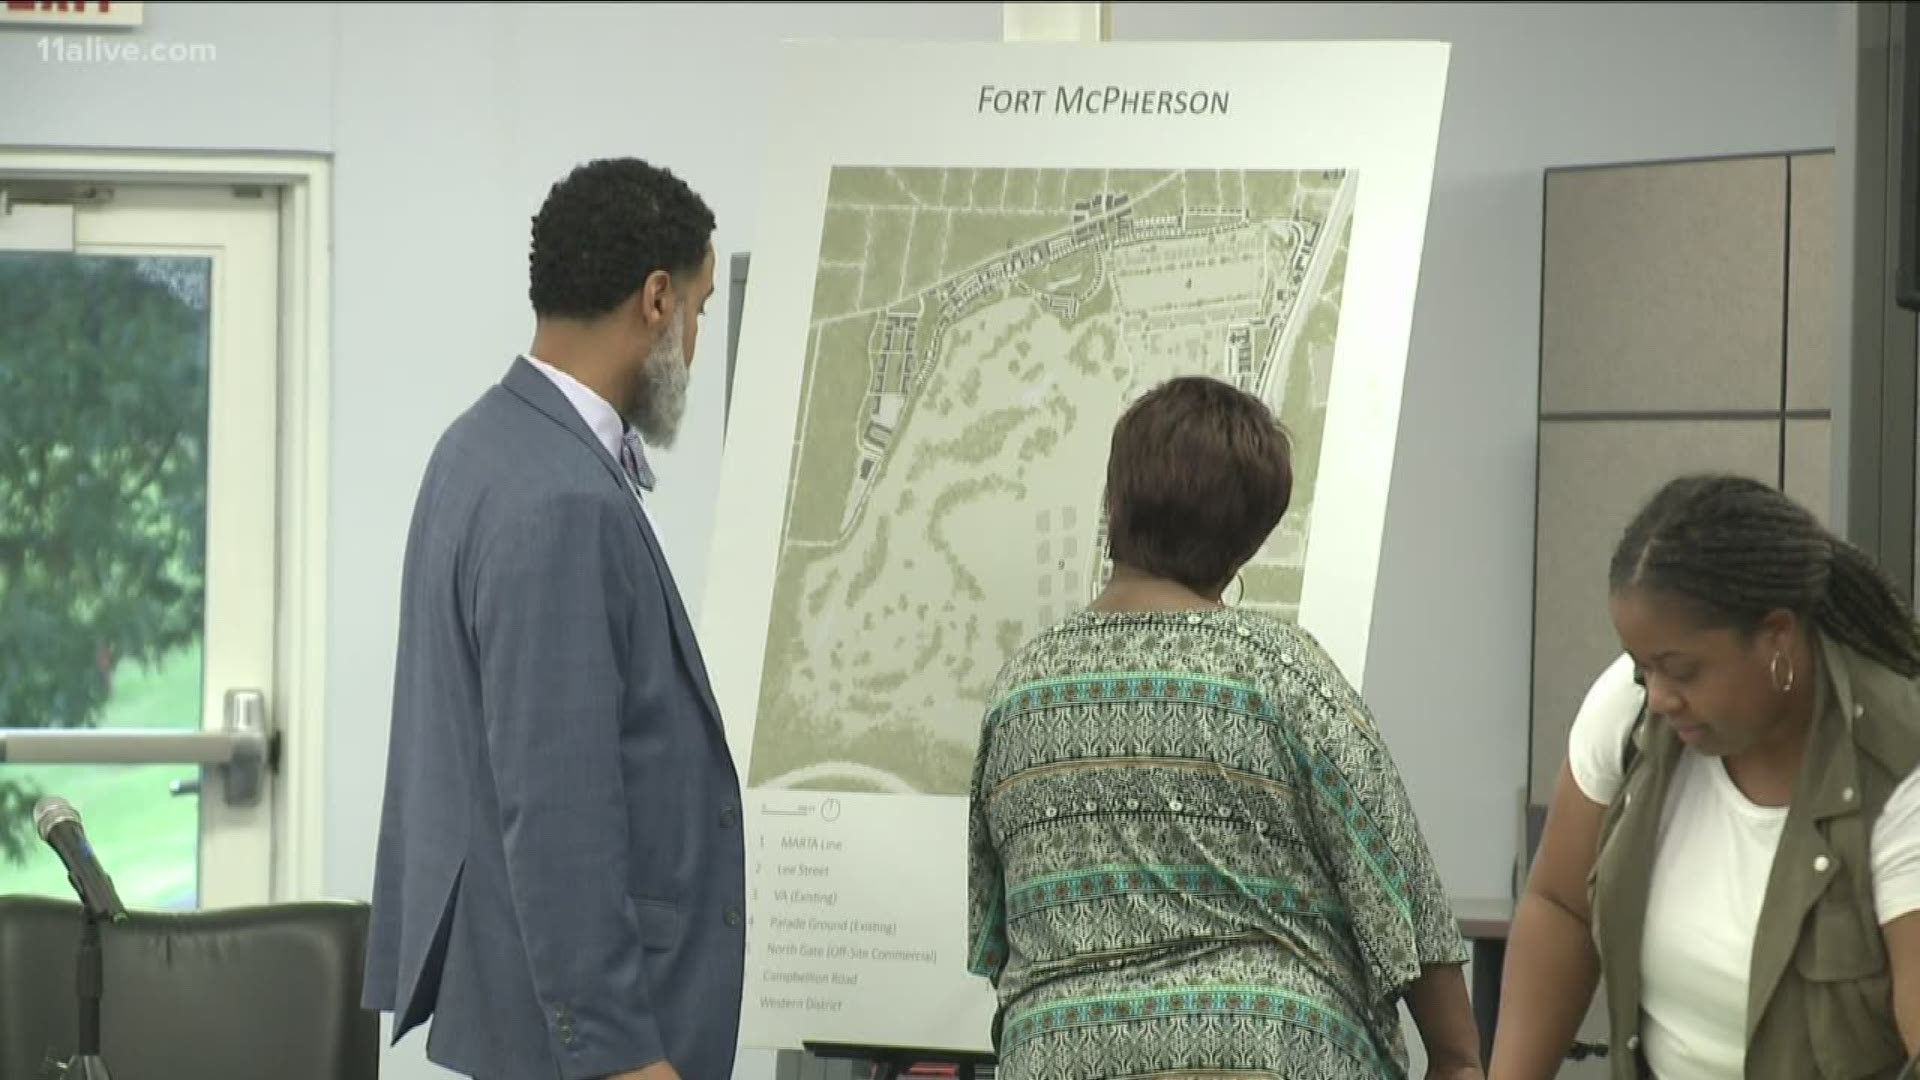 The Fort MAC local redevelopment authority says it plans to build a new facility called FORT JACC to house specialized training programs. It would allow people to get jobs after just a few weeks of intensive study.